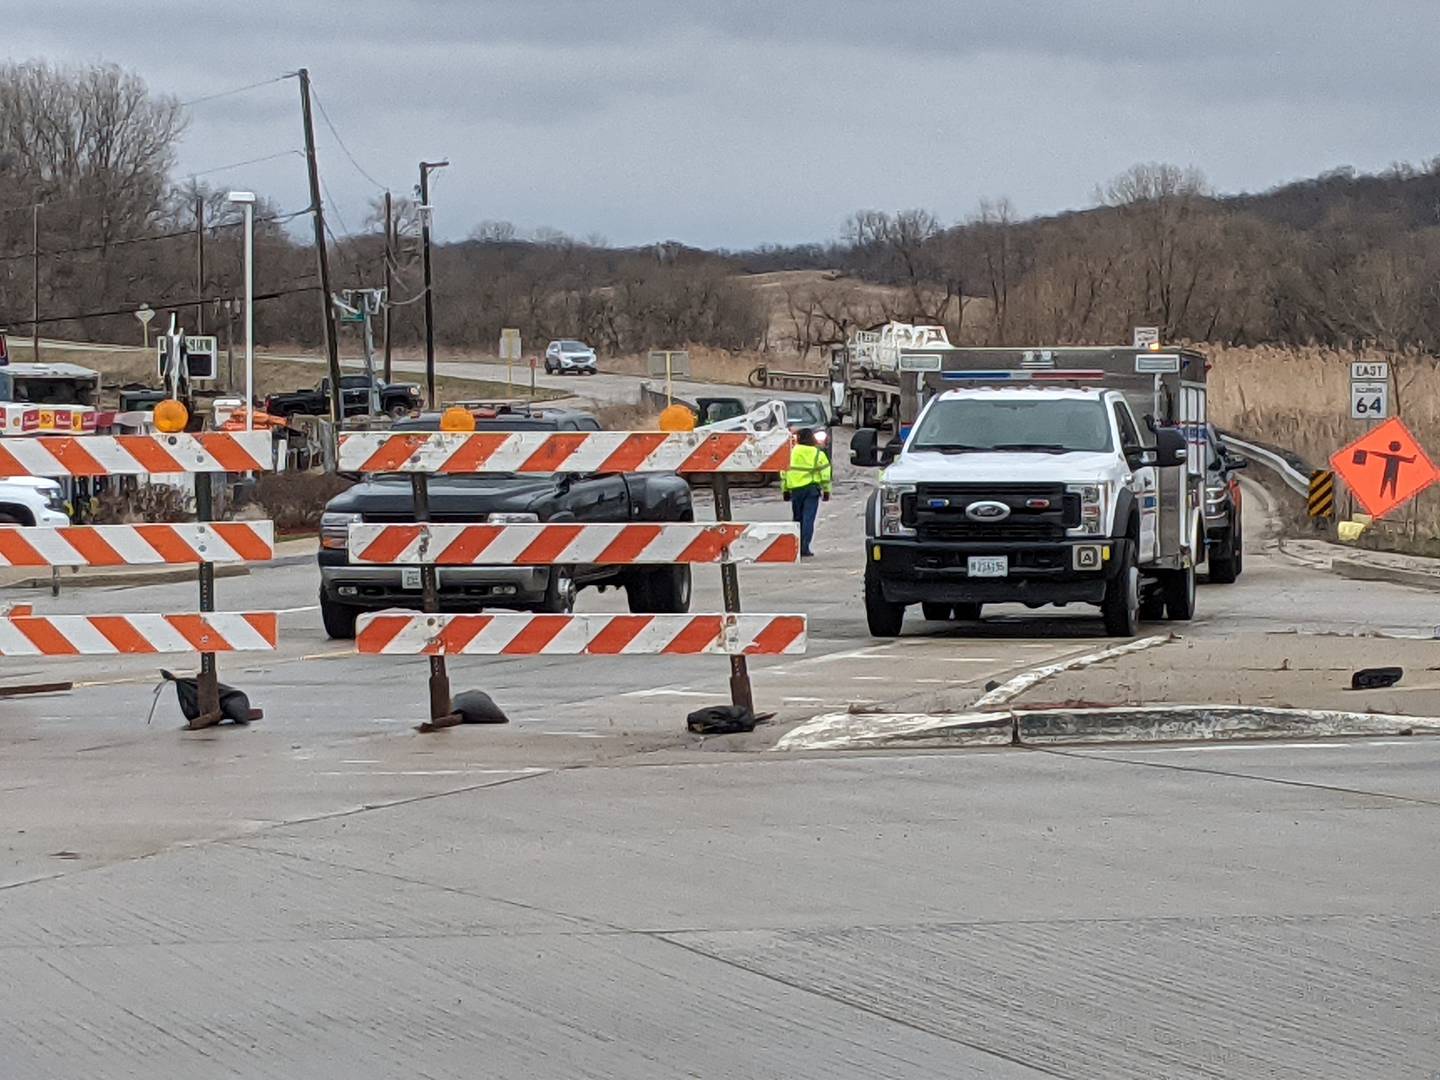 Officials for the Illinois Environmental Protection Agency continue to assess the damage done to the environment after nearly 8,000 gallons of gasoline on Wednesday leaked from the Shell gas station at the intersection of routes 64 and 47 in Lily Lake.